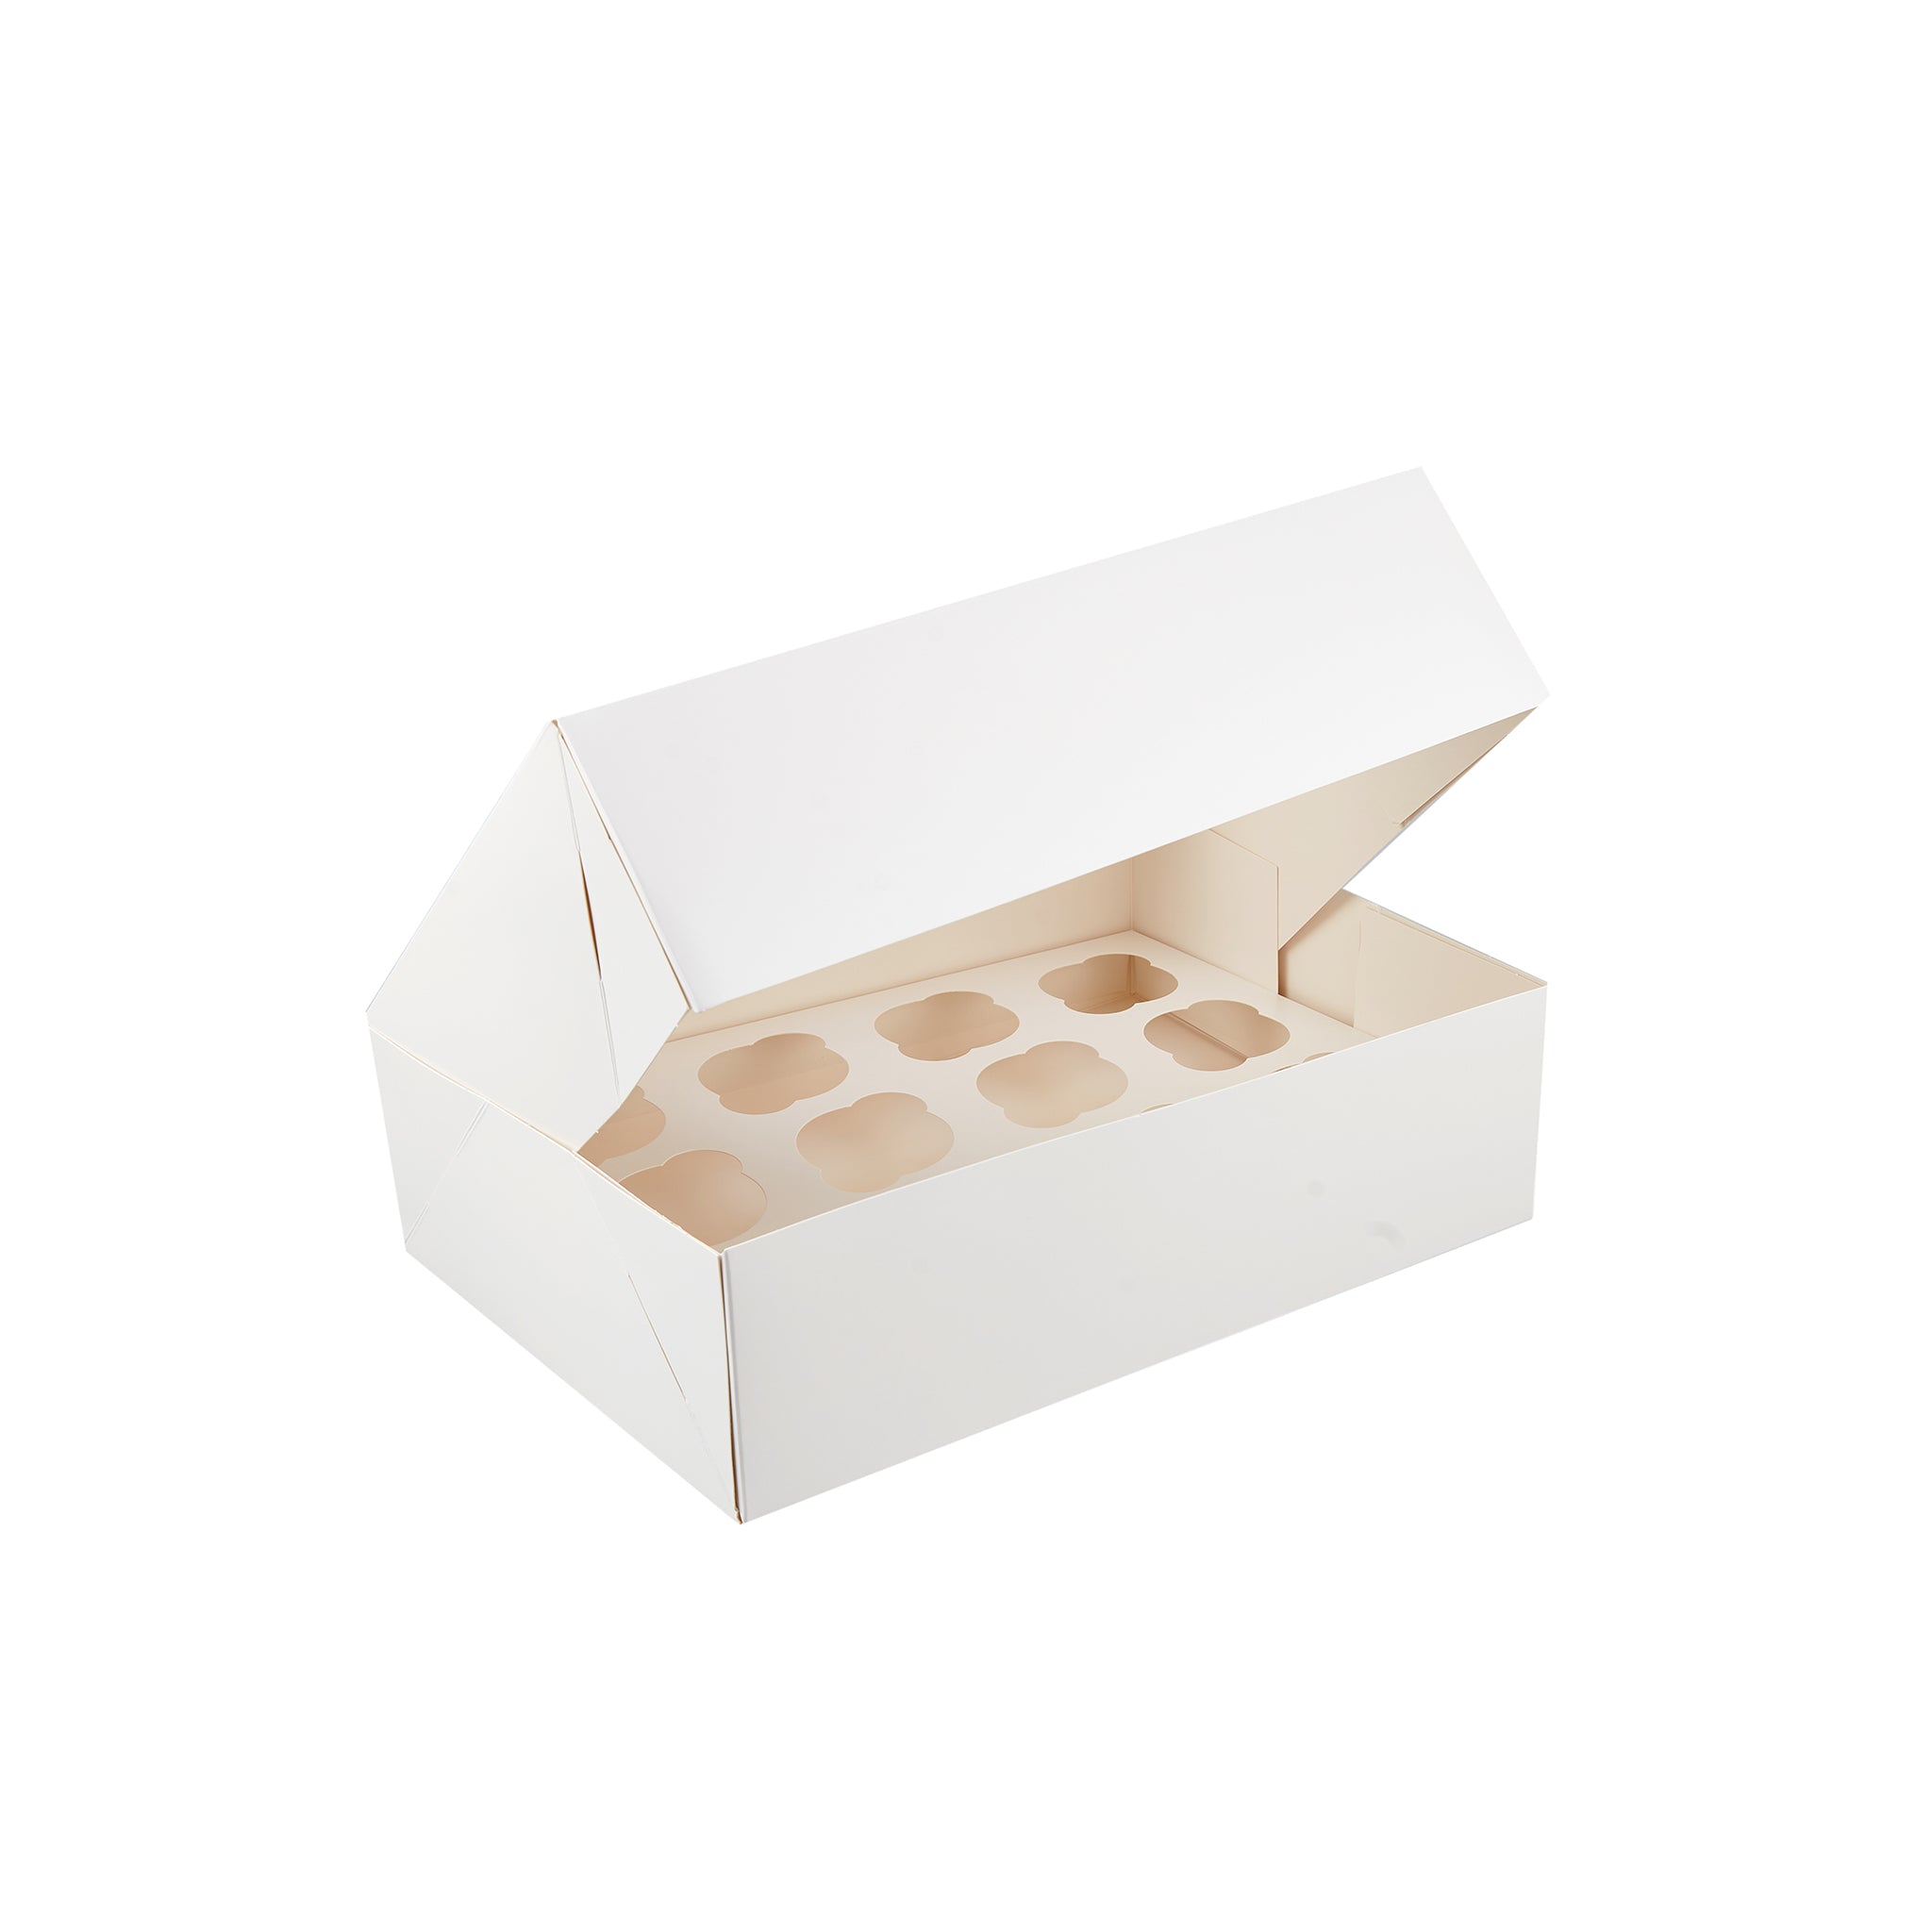 ARCHIVE BOX BANK Souvenirs Organized And Secure With Elegance